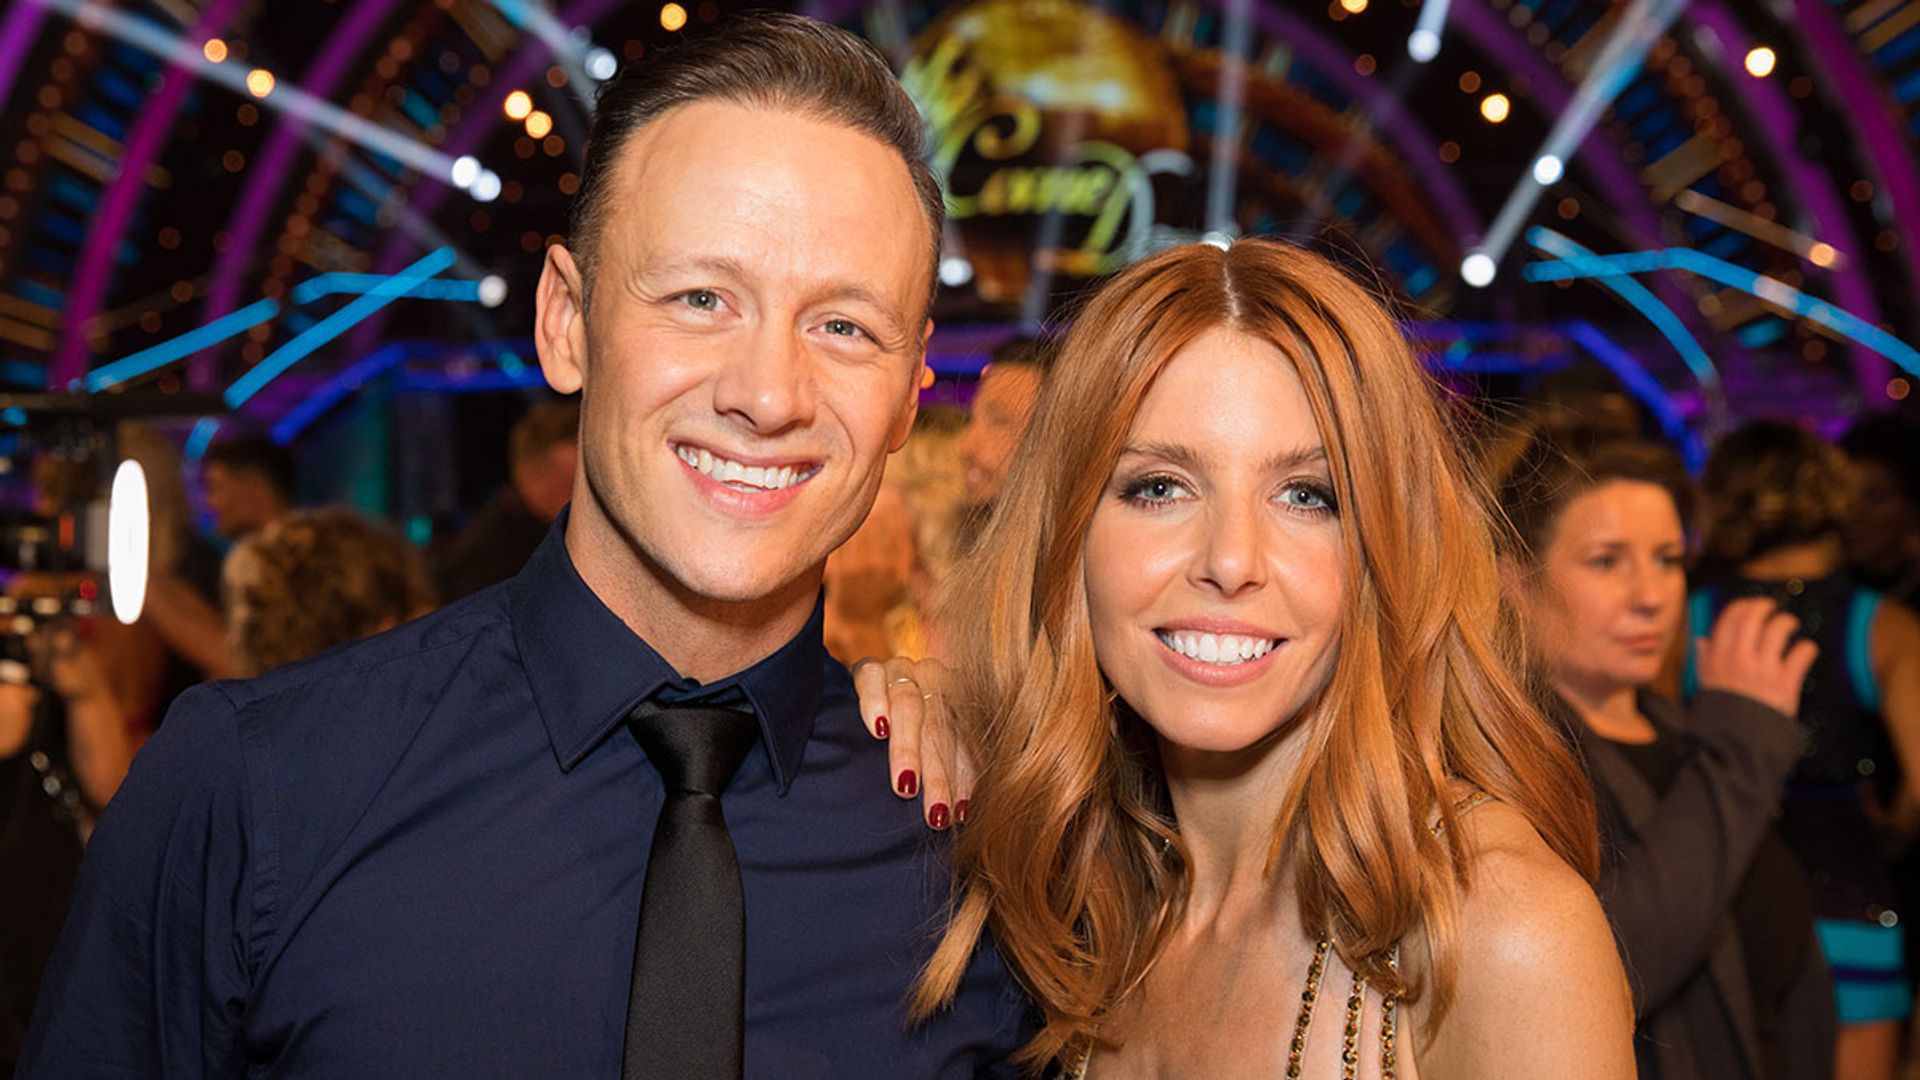 Kevin Clifton and Stacey Dooley on set at Strictly